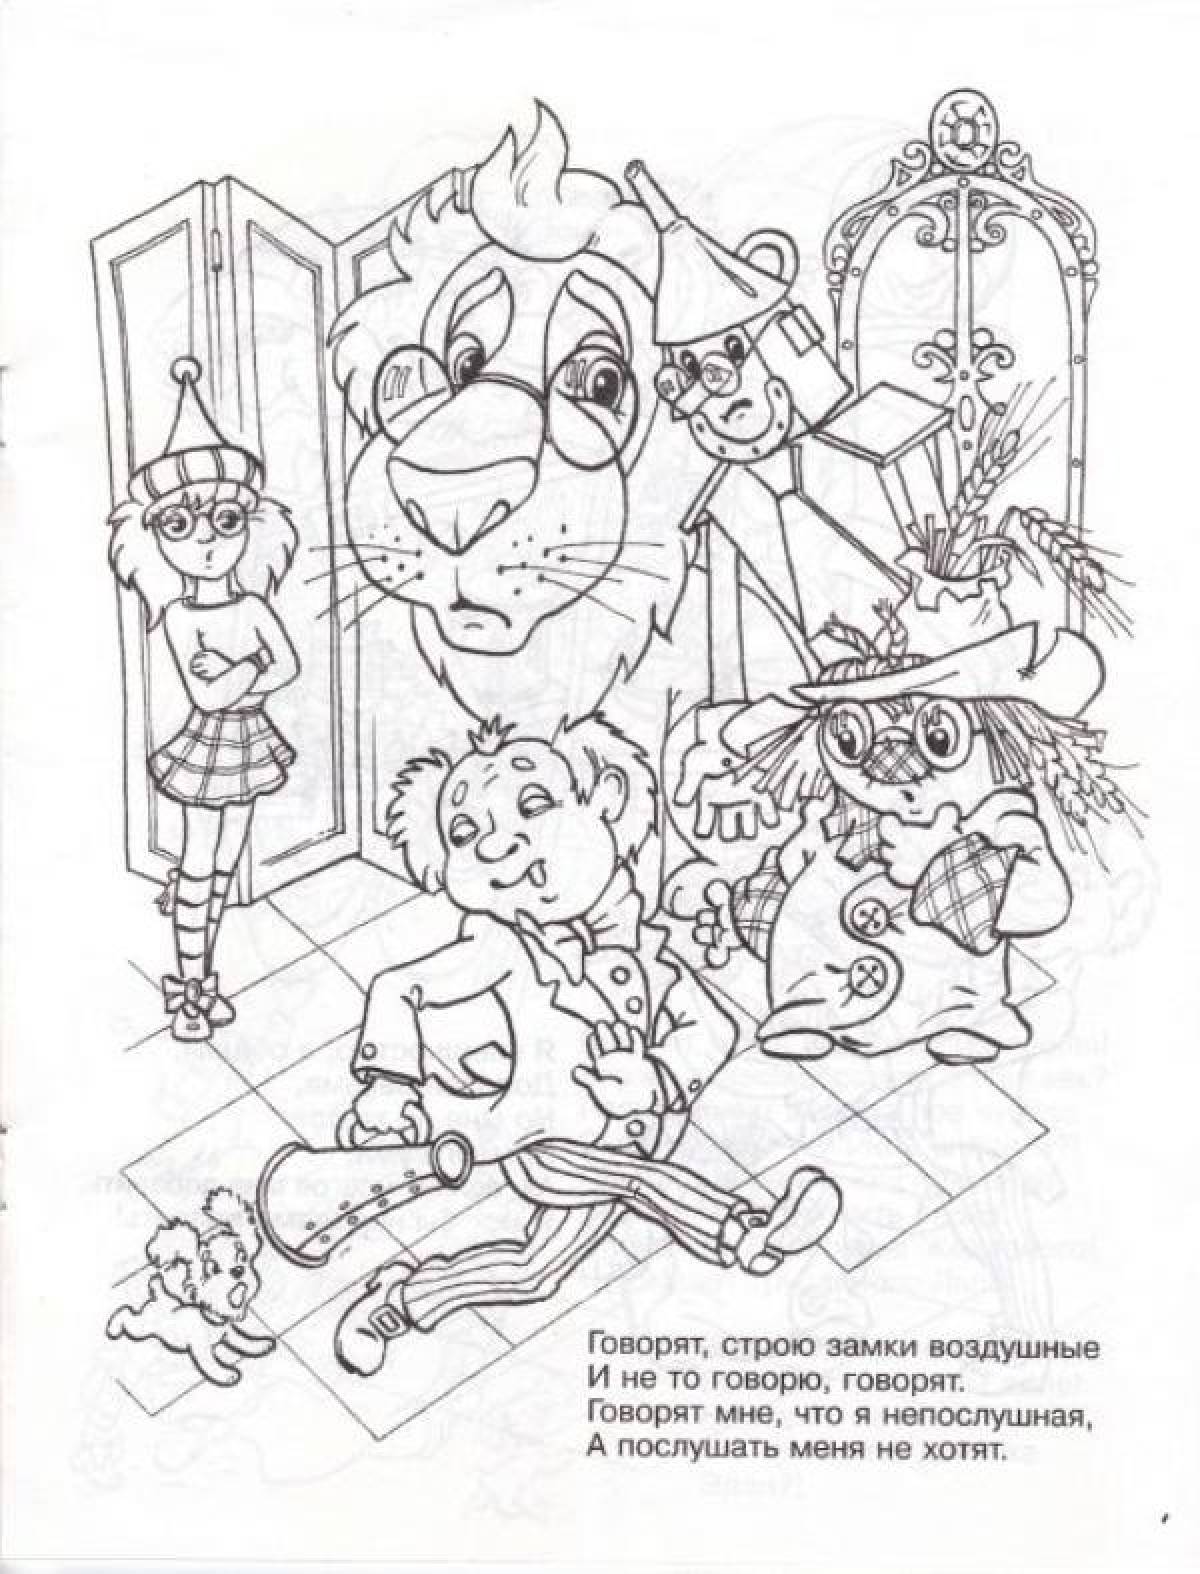 Photo From the cartoons, the Wizard of Oz #1